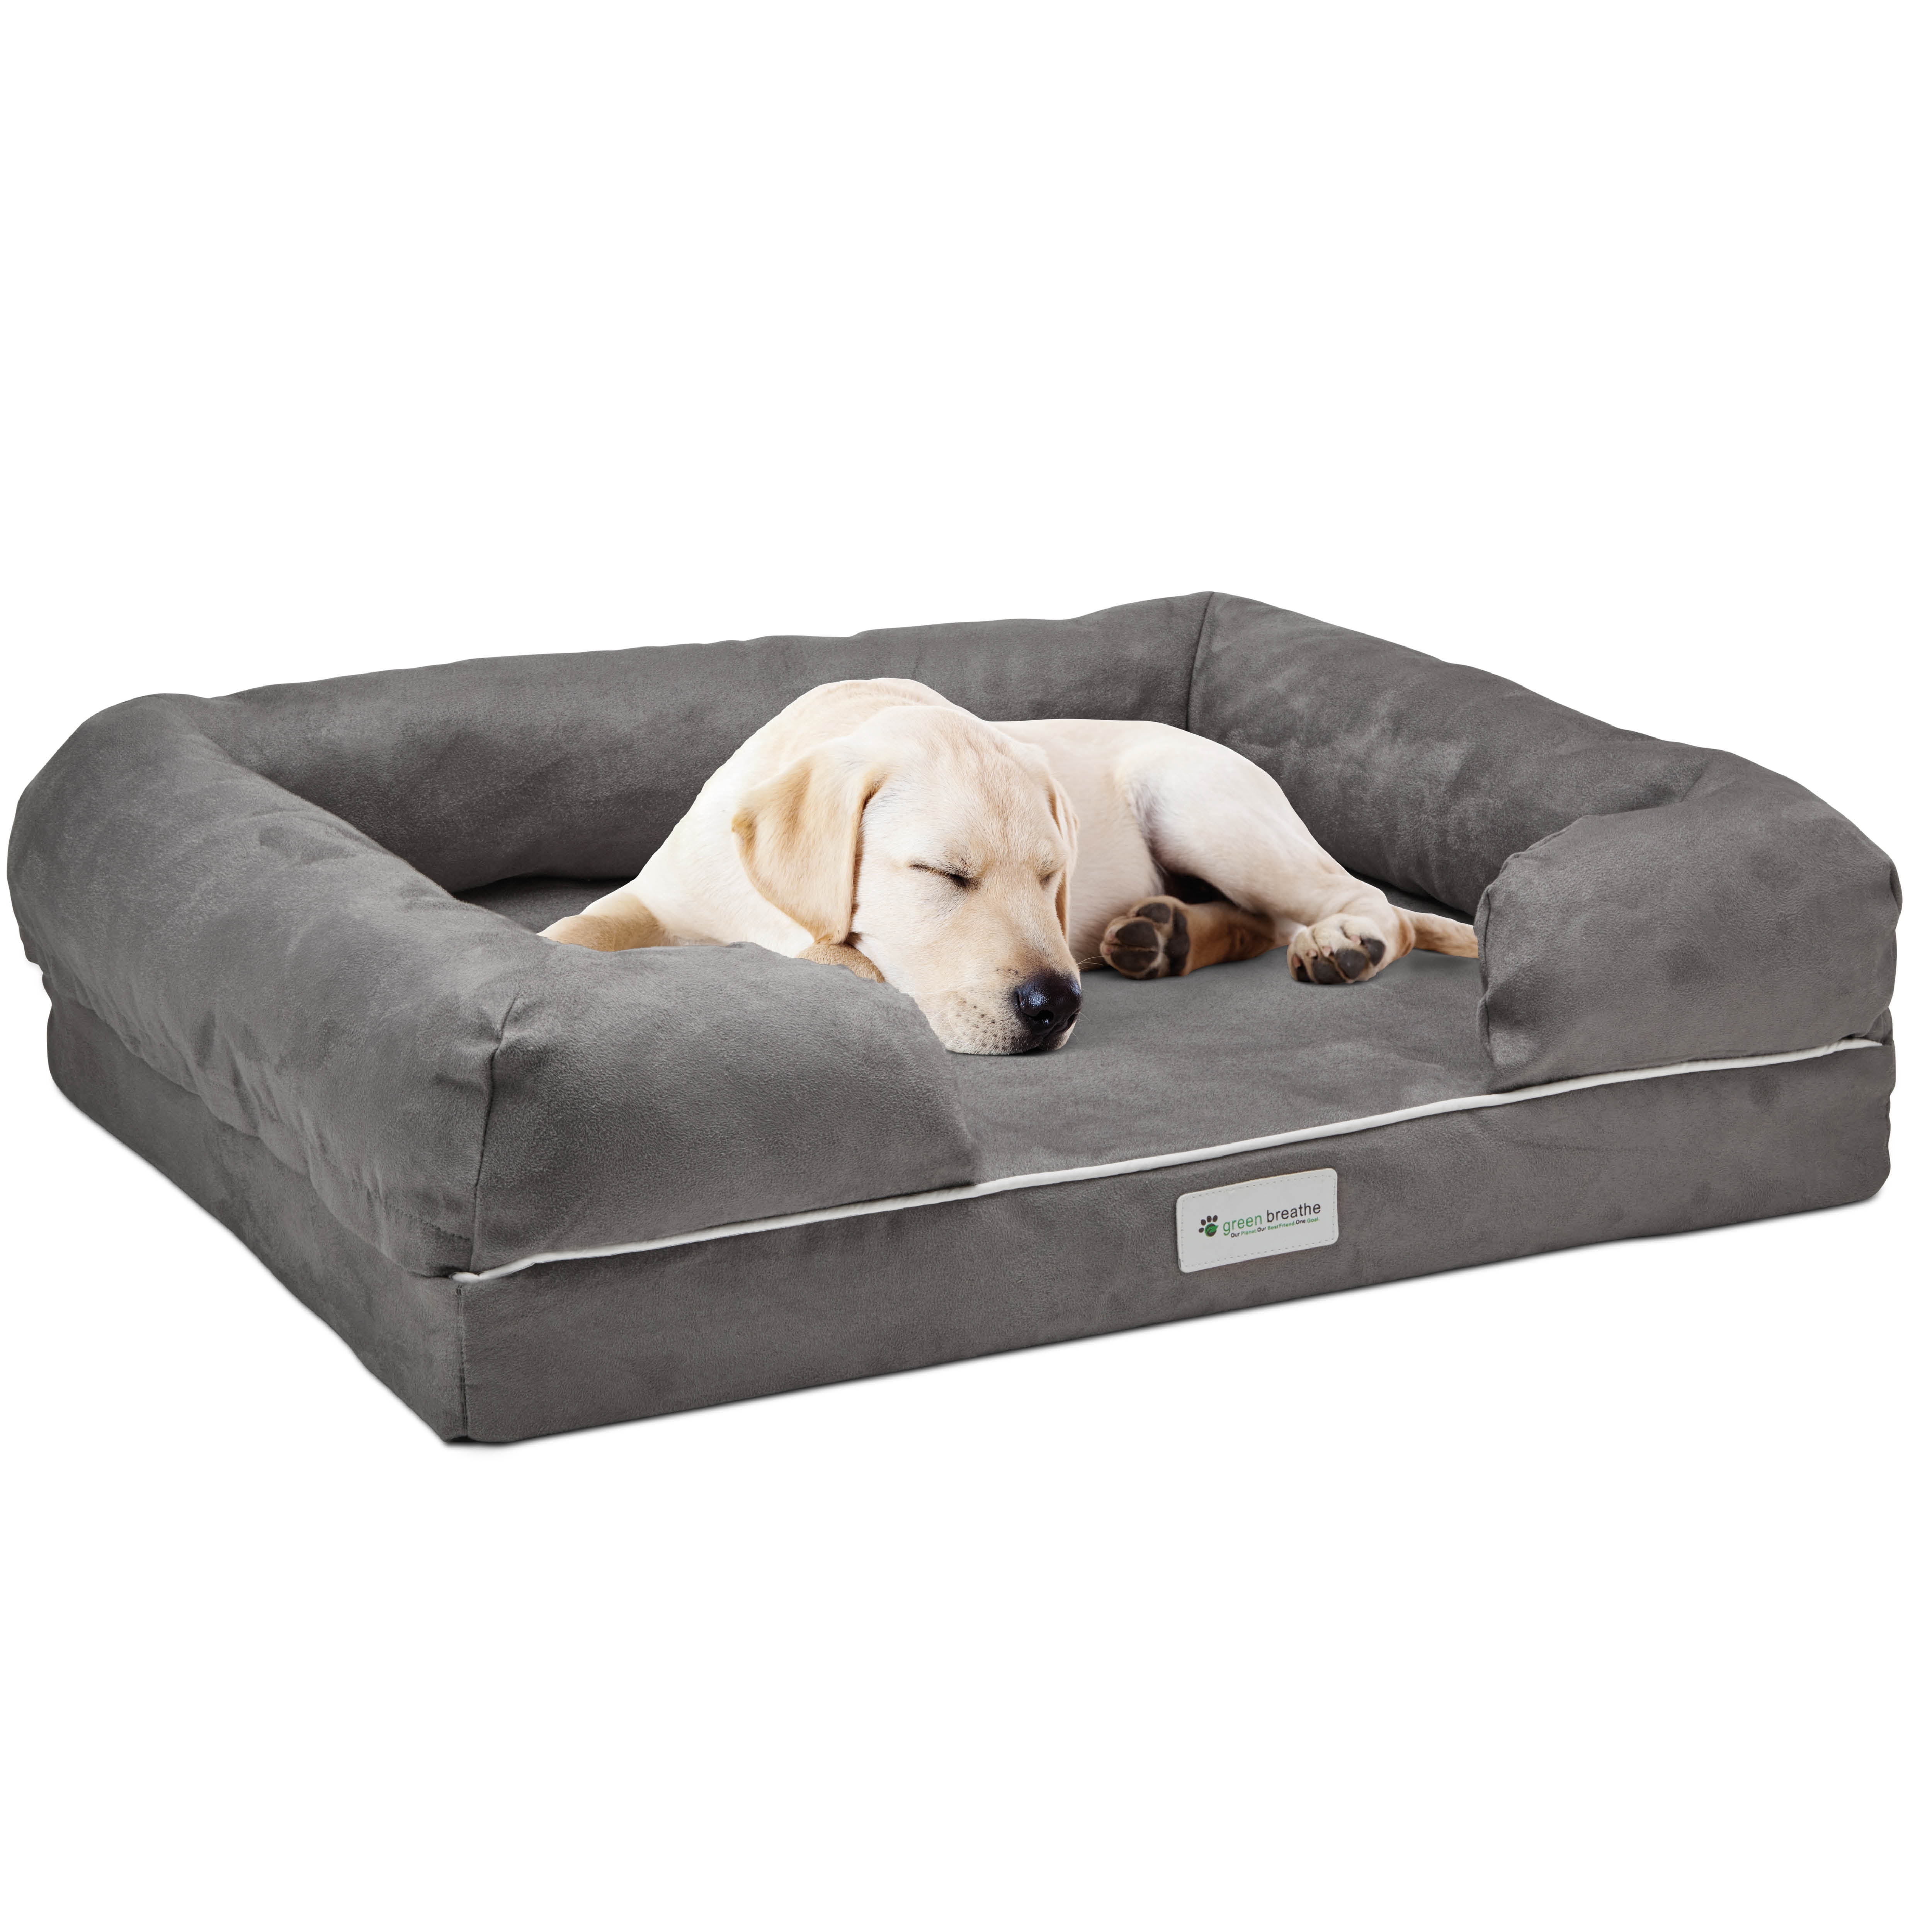 Odor Free Dog Bed Luxury Memory Foam with Natures